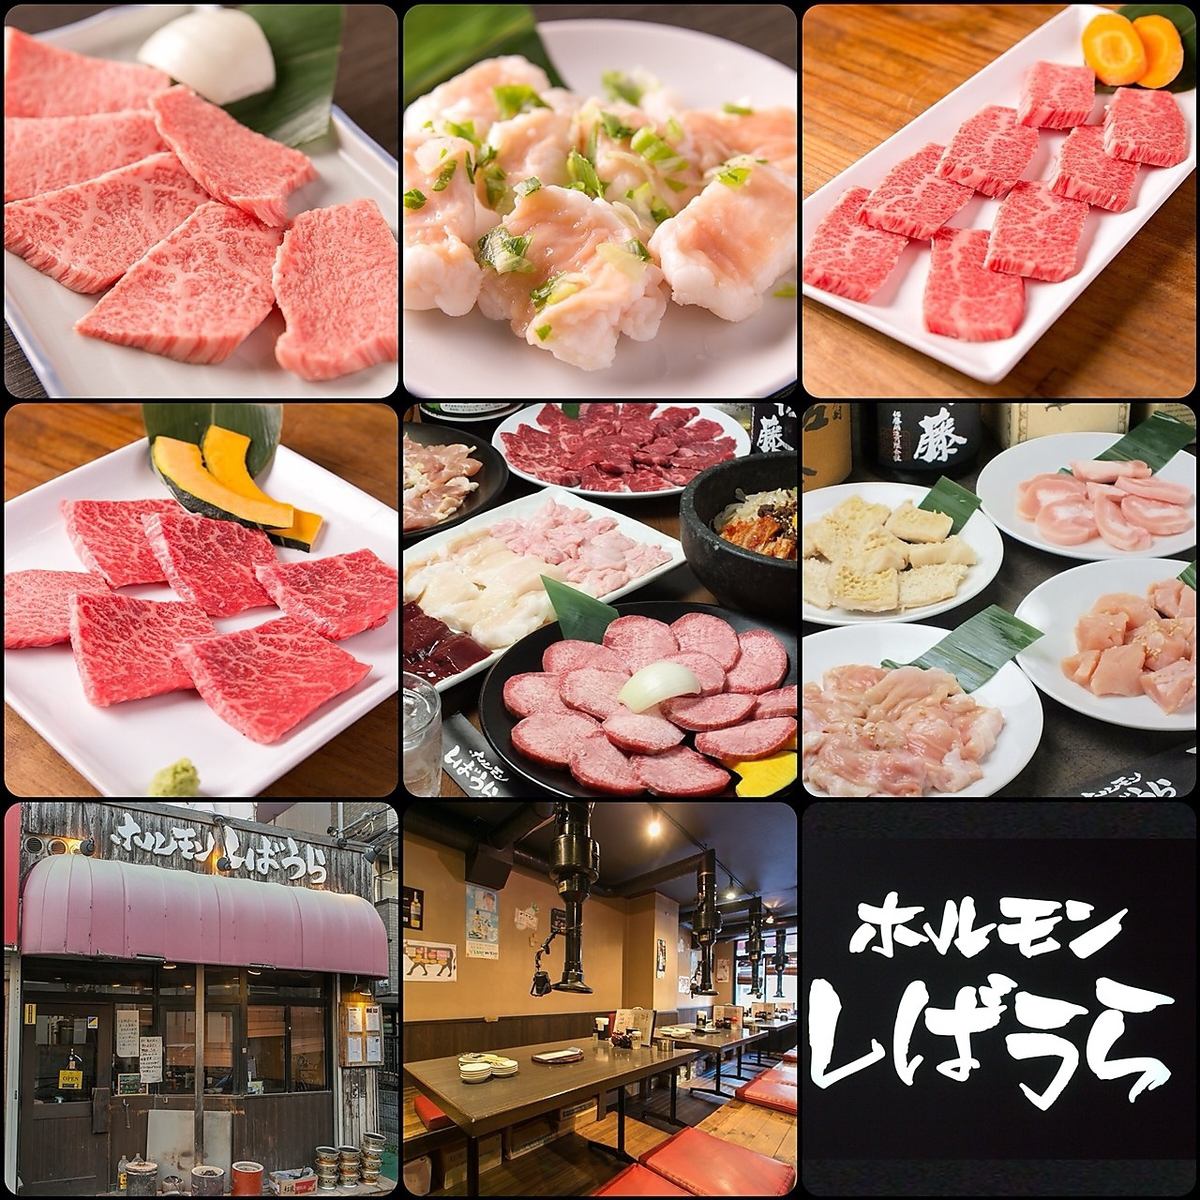 Immediately after Musashi-Shinjo Station ◎ Enjoy the freshness of hormones and A5 rank special Japanese beef at a reasonable price!